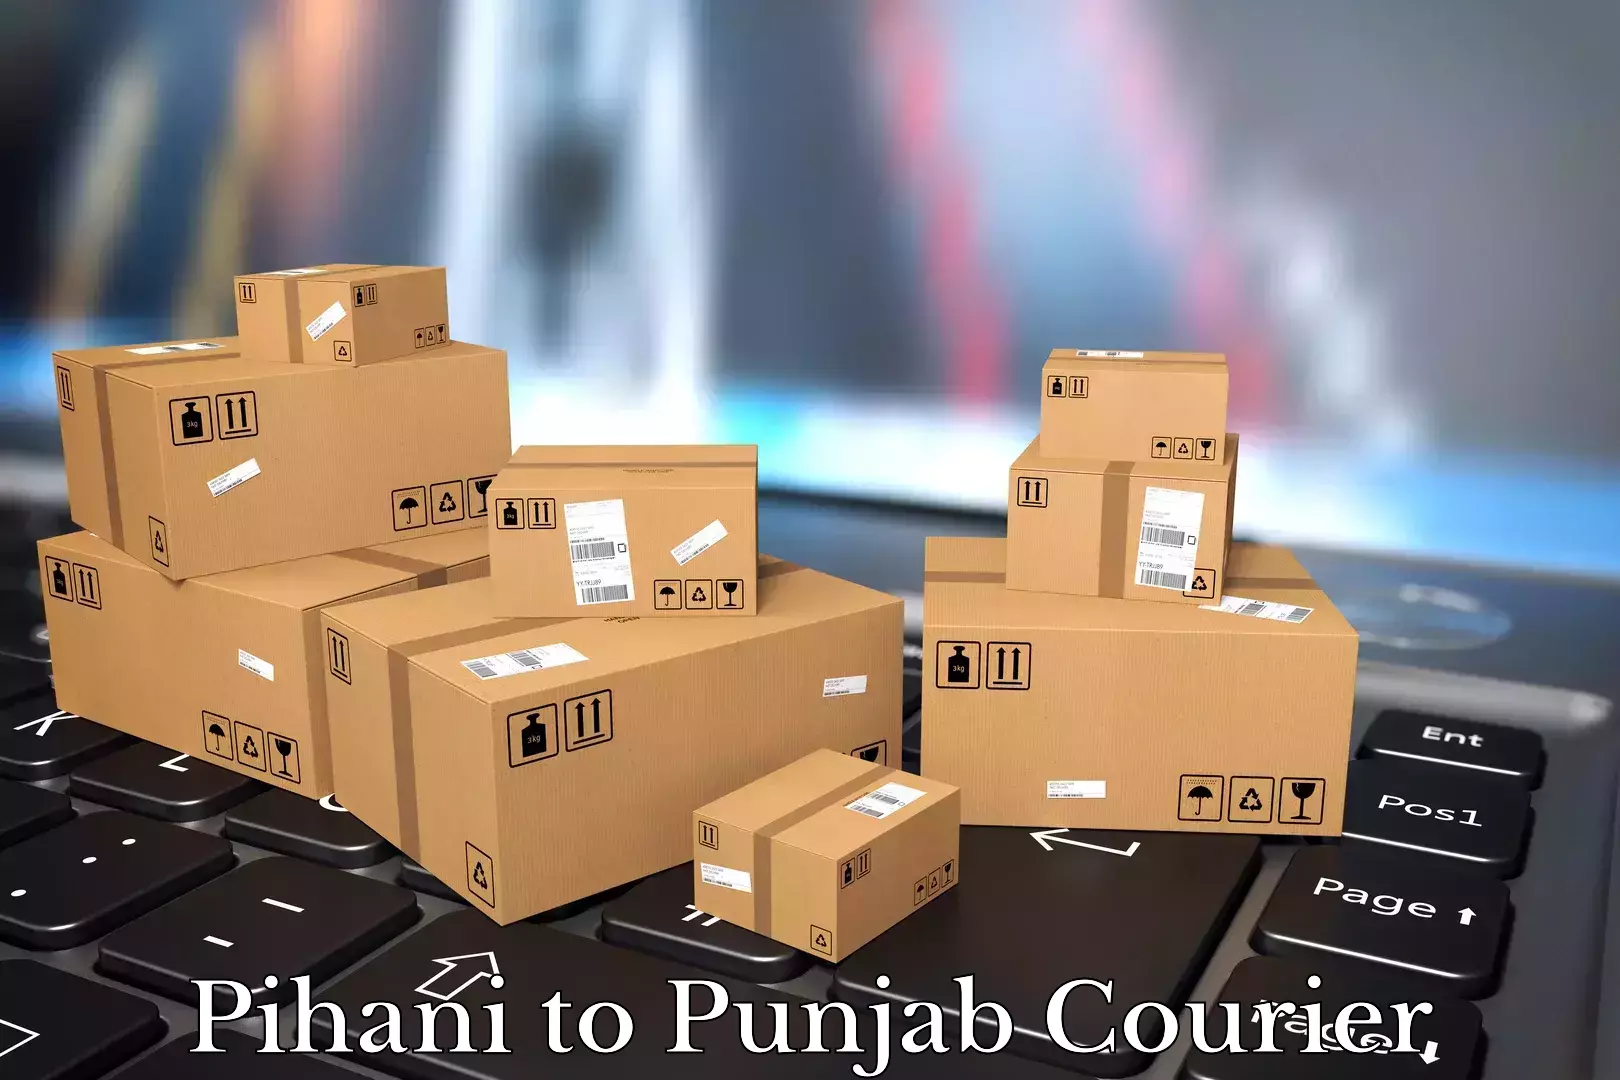 Trusted relocation experts Pihani to Sangrur